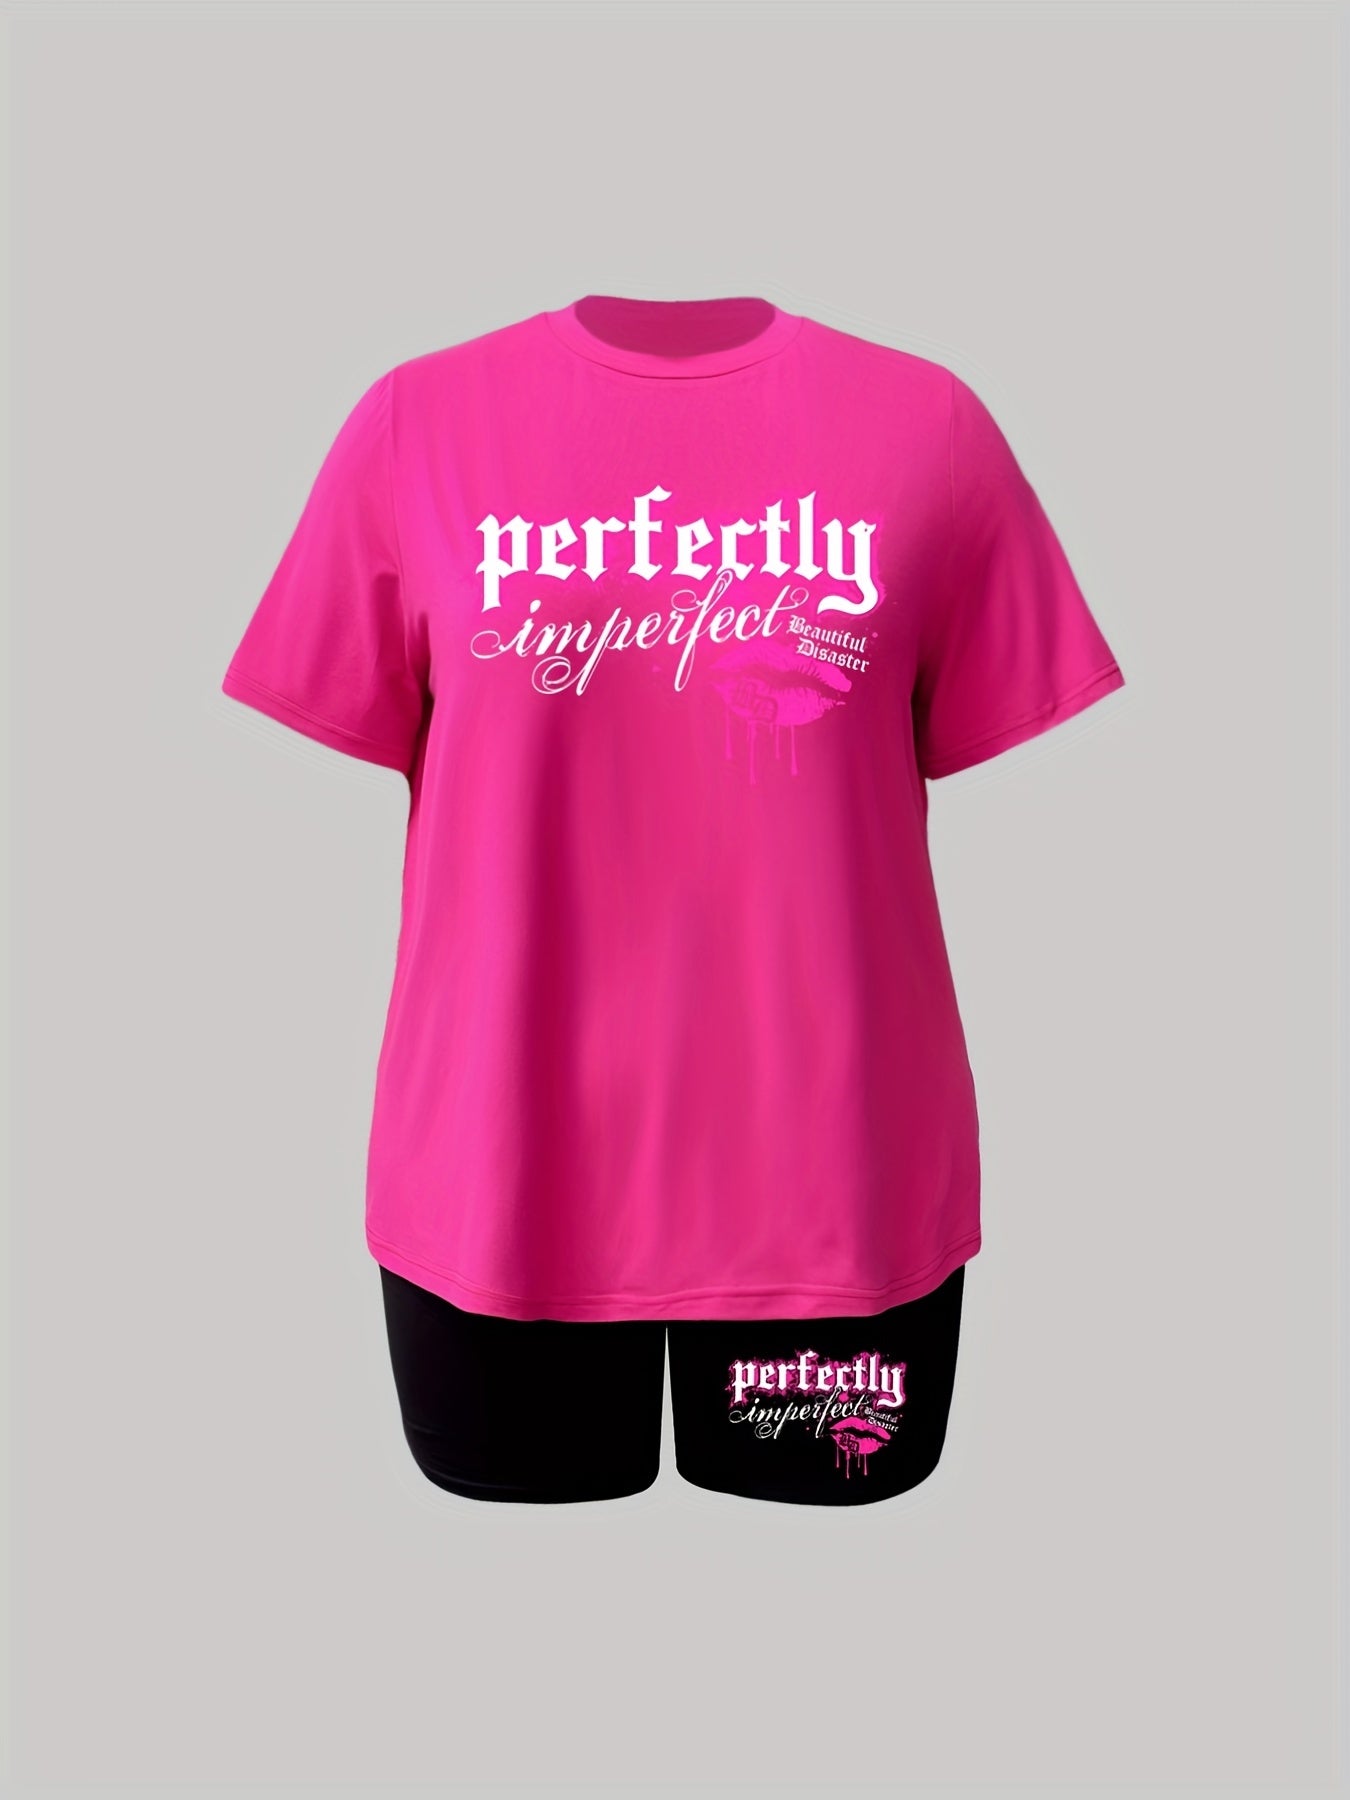 Perfectly Imperfect (2) Plus Size Women's Christian Casual Outfit claimedbygoddesigns